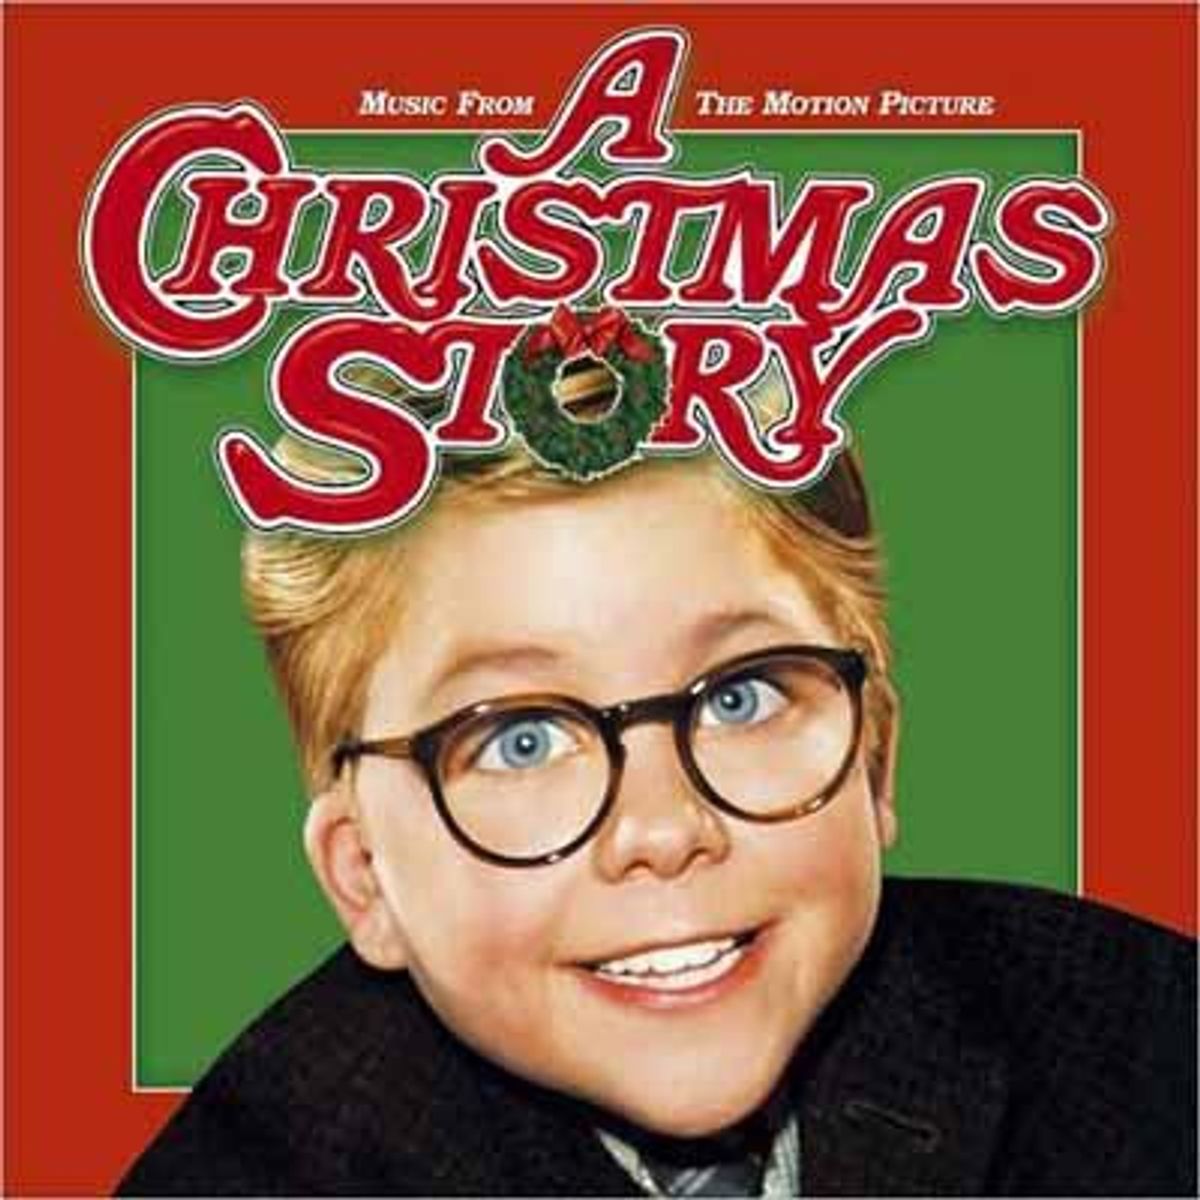 "A Christmas Story": The Scenes You Need to See